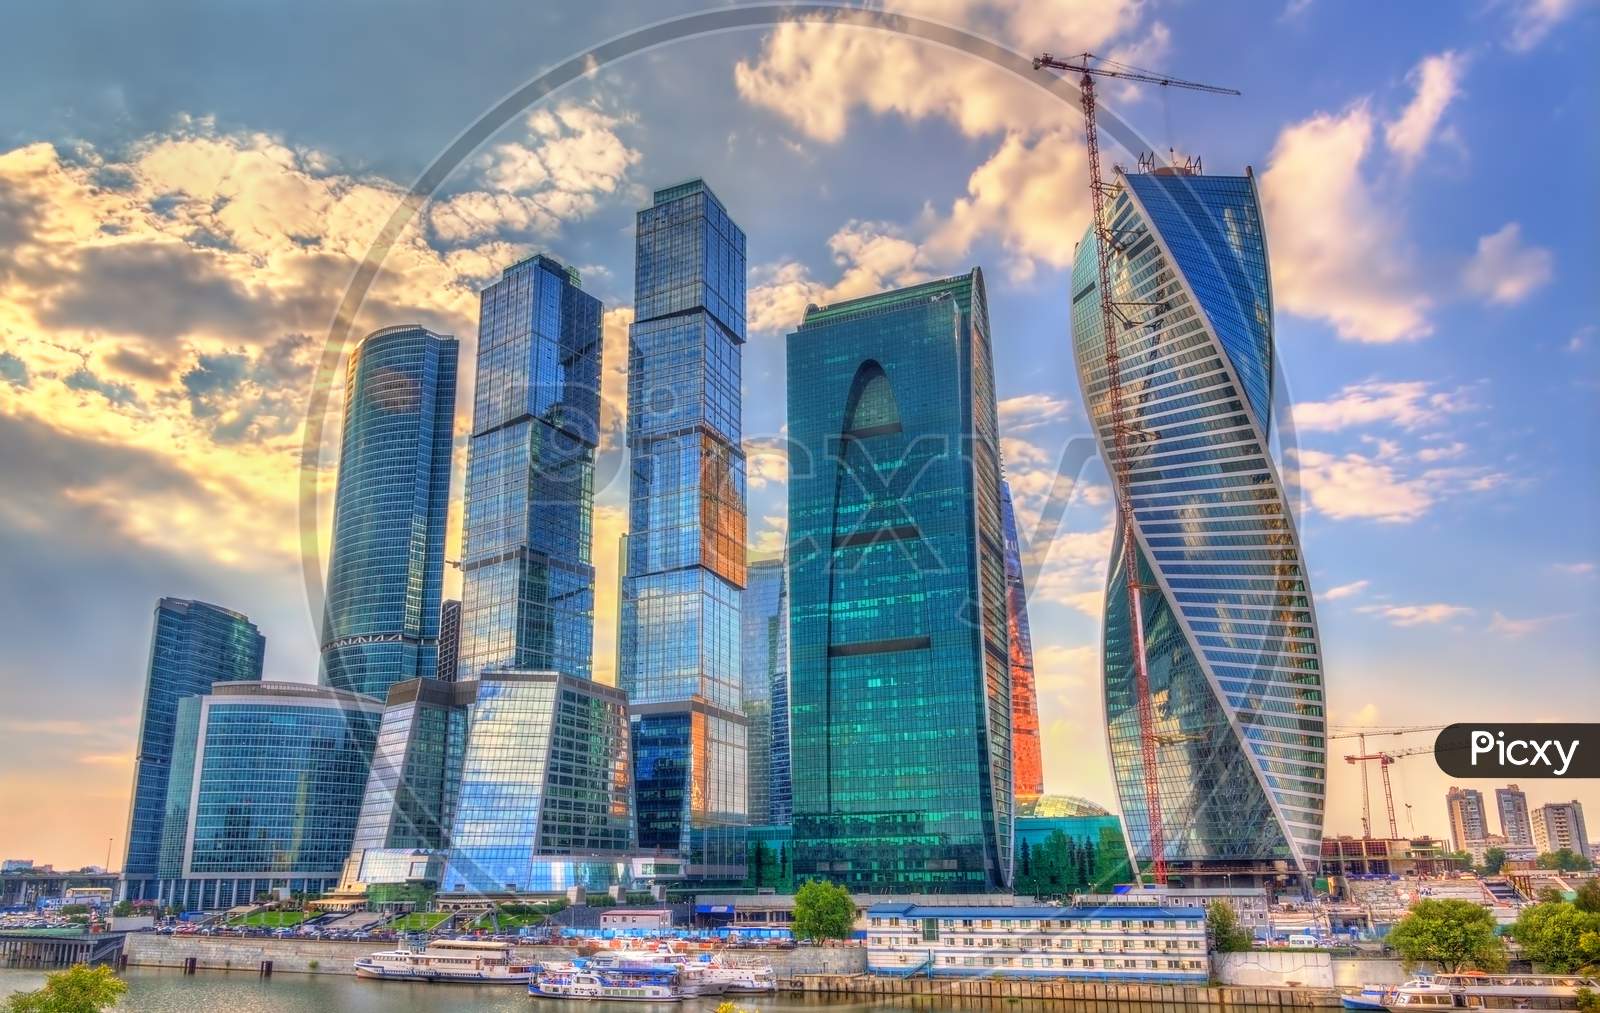 View Of The Moscow International Business Centre Also Known As Moscow-City. Russia